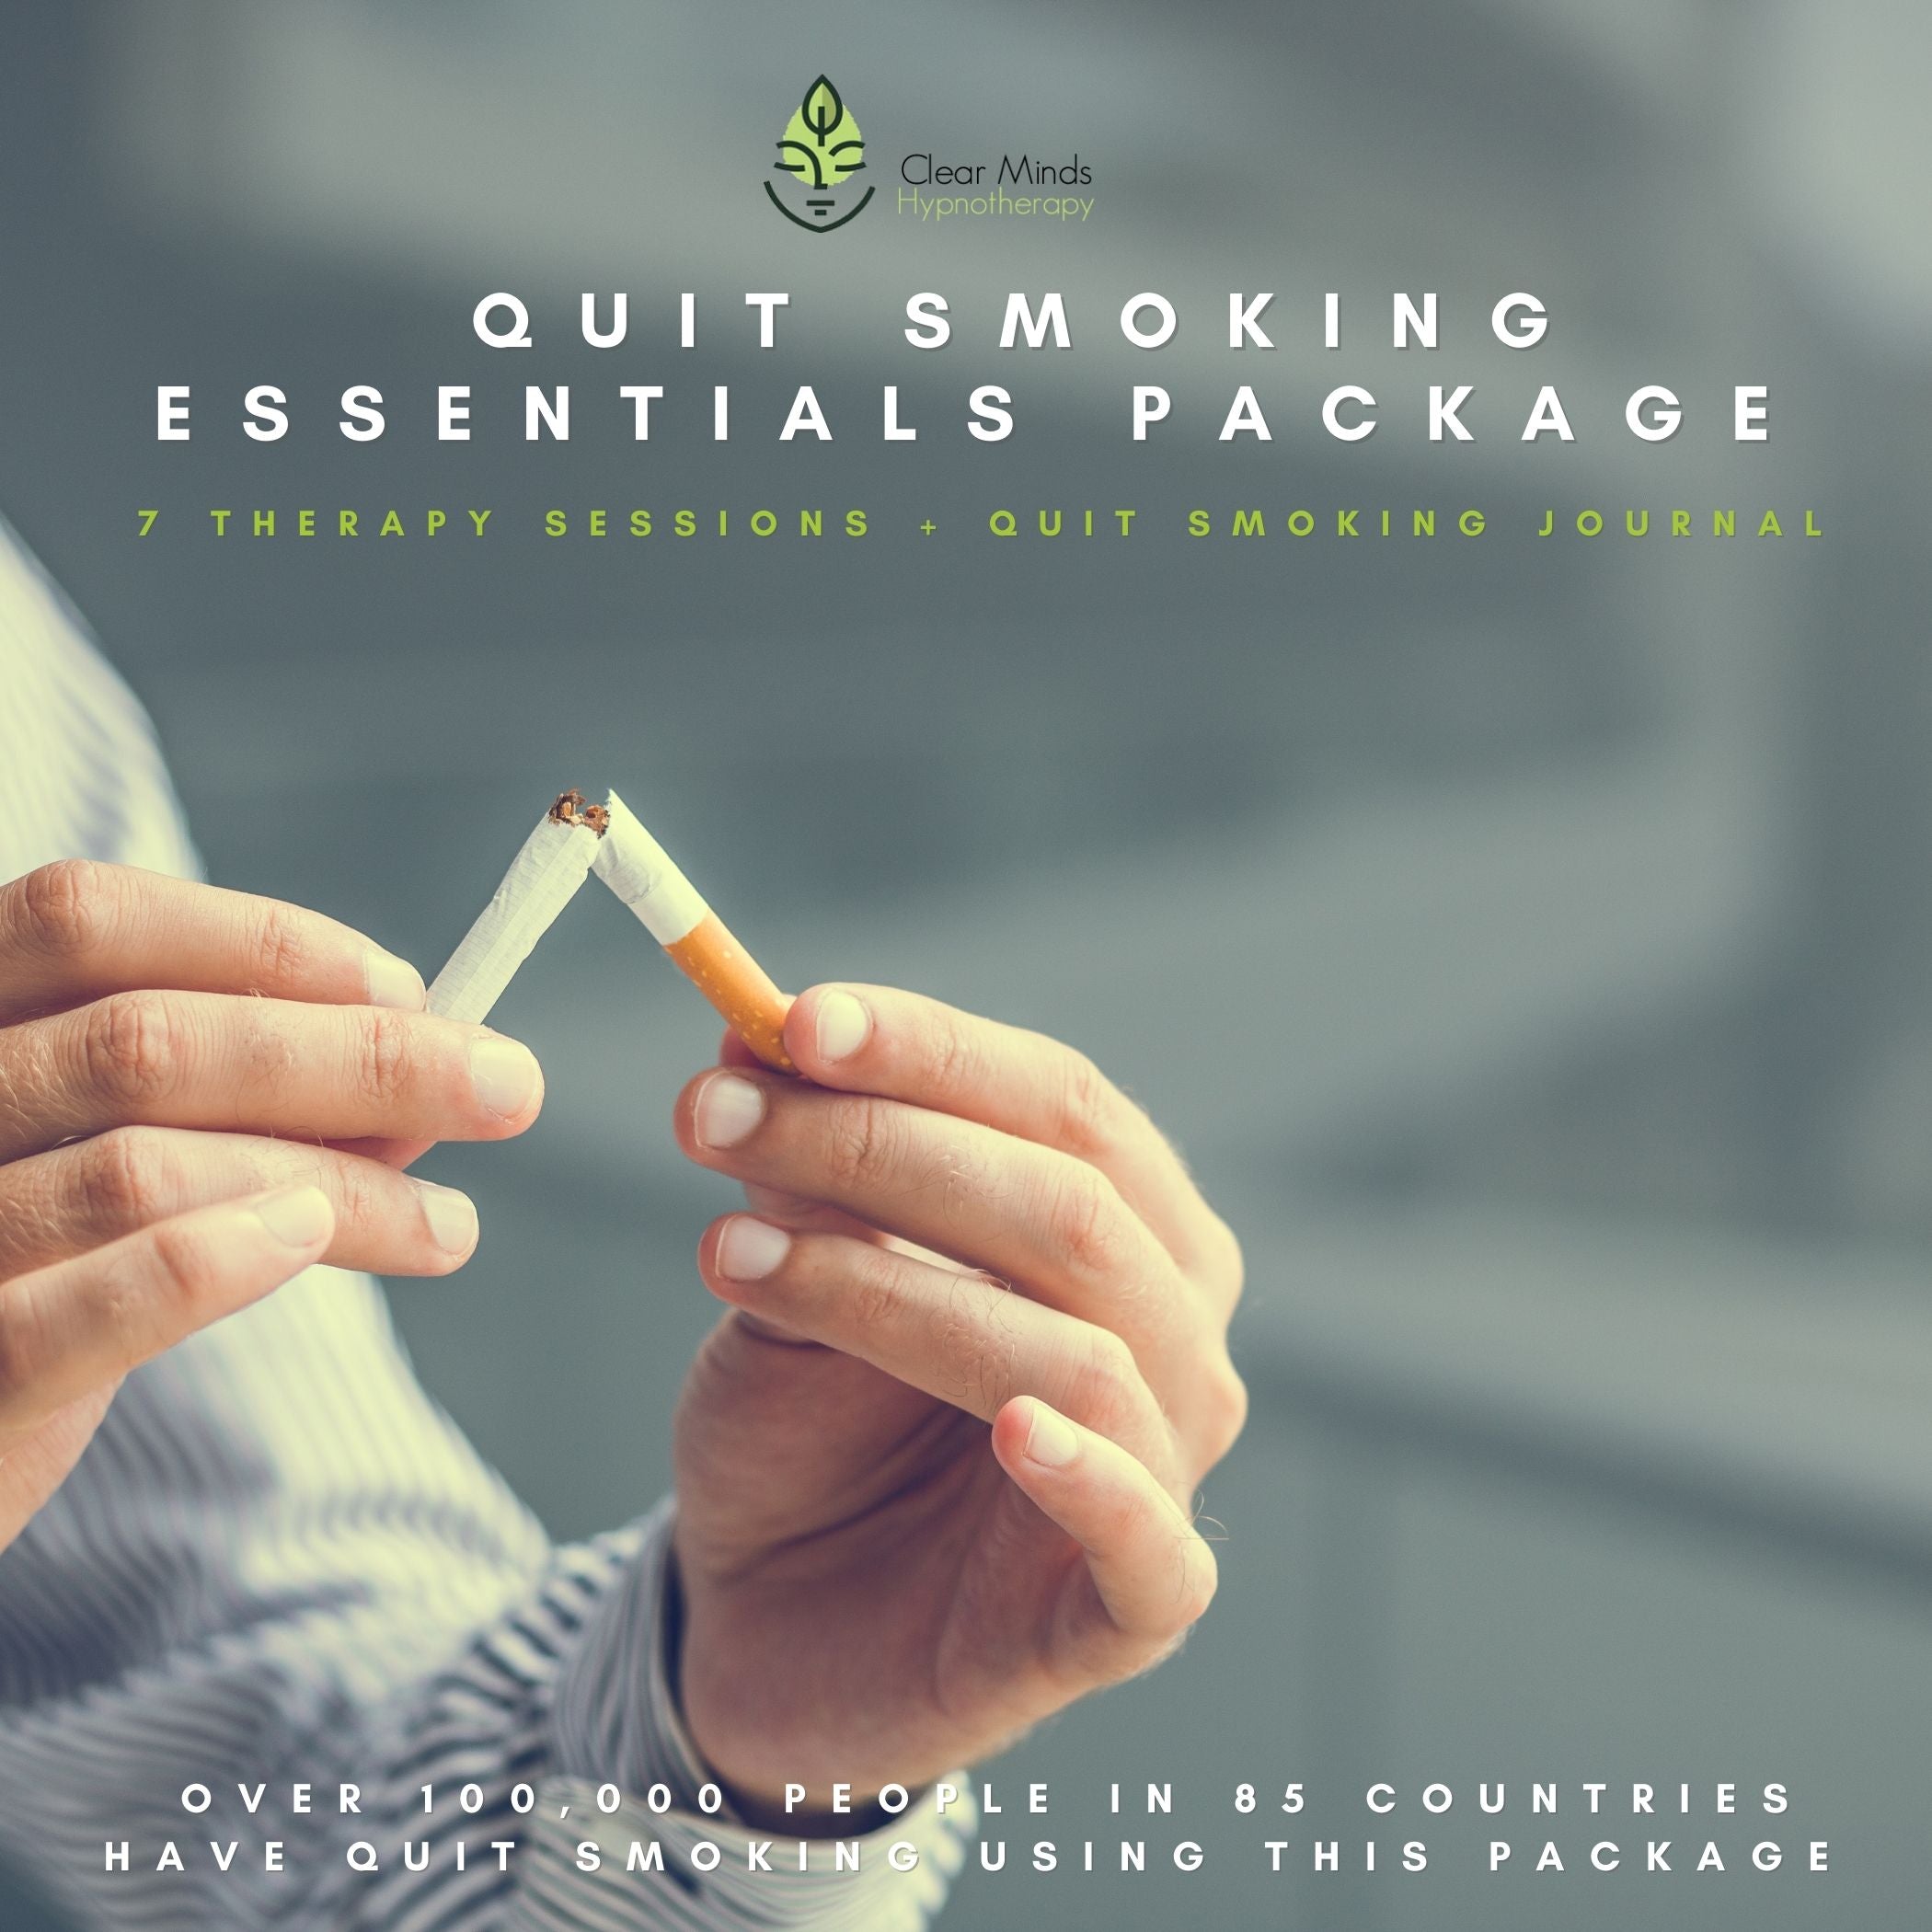 0 S Hypnotherapy QUIT SMOKING ESSENTIALS PACKAGE 7 THERAPY SESSIONS QUIT SMOKING JOURNA L - T - O o OVERILOOL000 PEO HAVE QUIT.SM O Kuungl LE IN 85 COUNTRIES IUSING THIS PACKAGE 